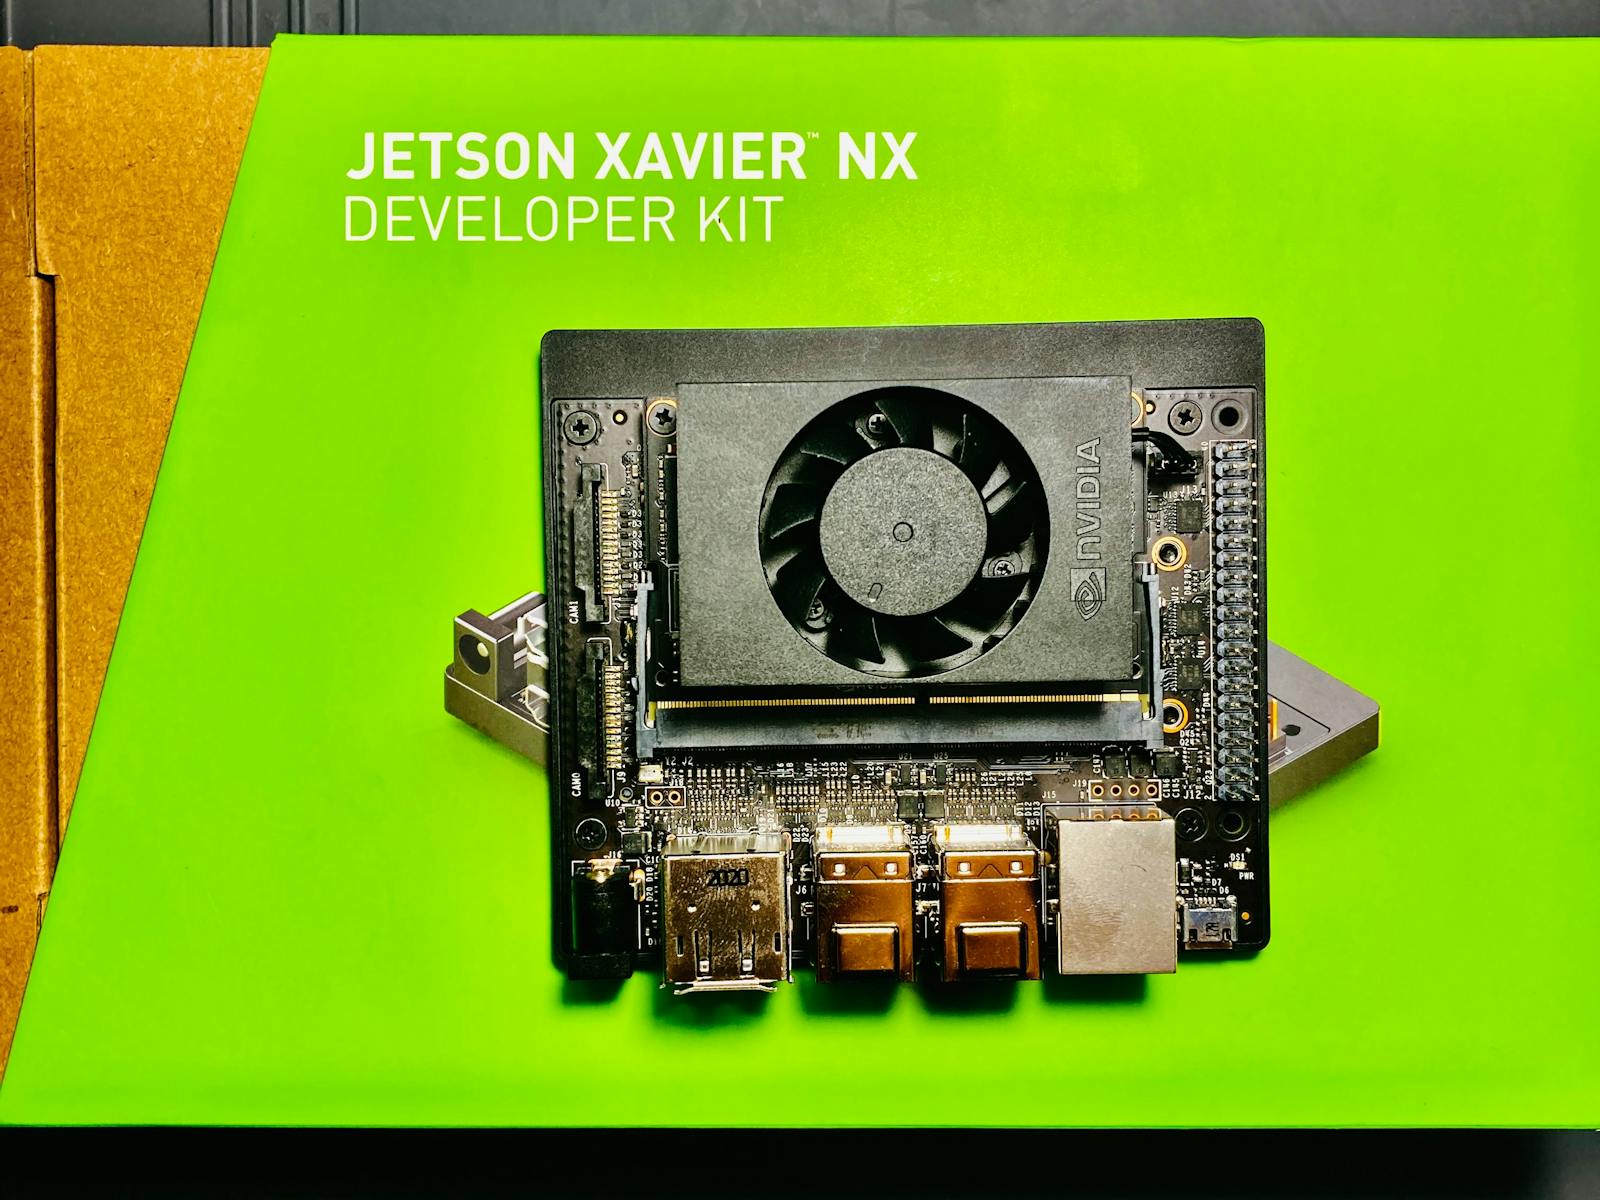 Getting Started with NVIDIA Jetson Xavier NX Developer Kit